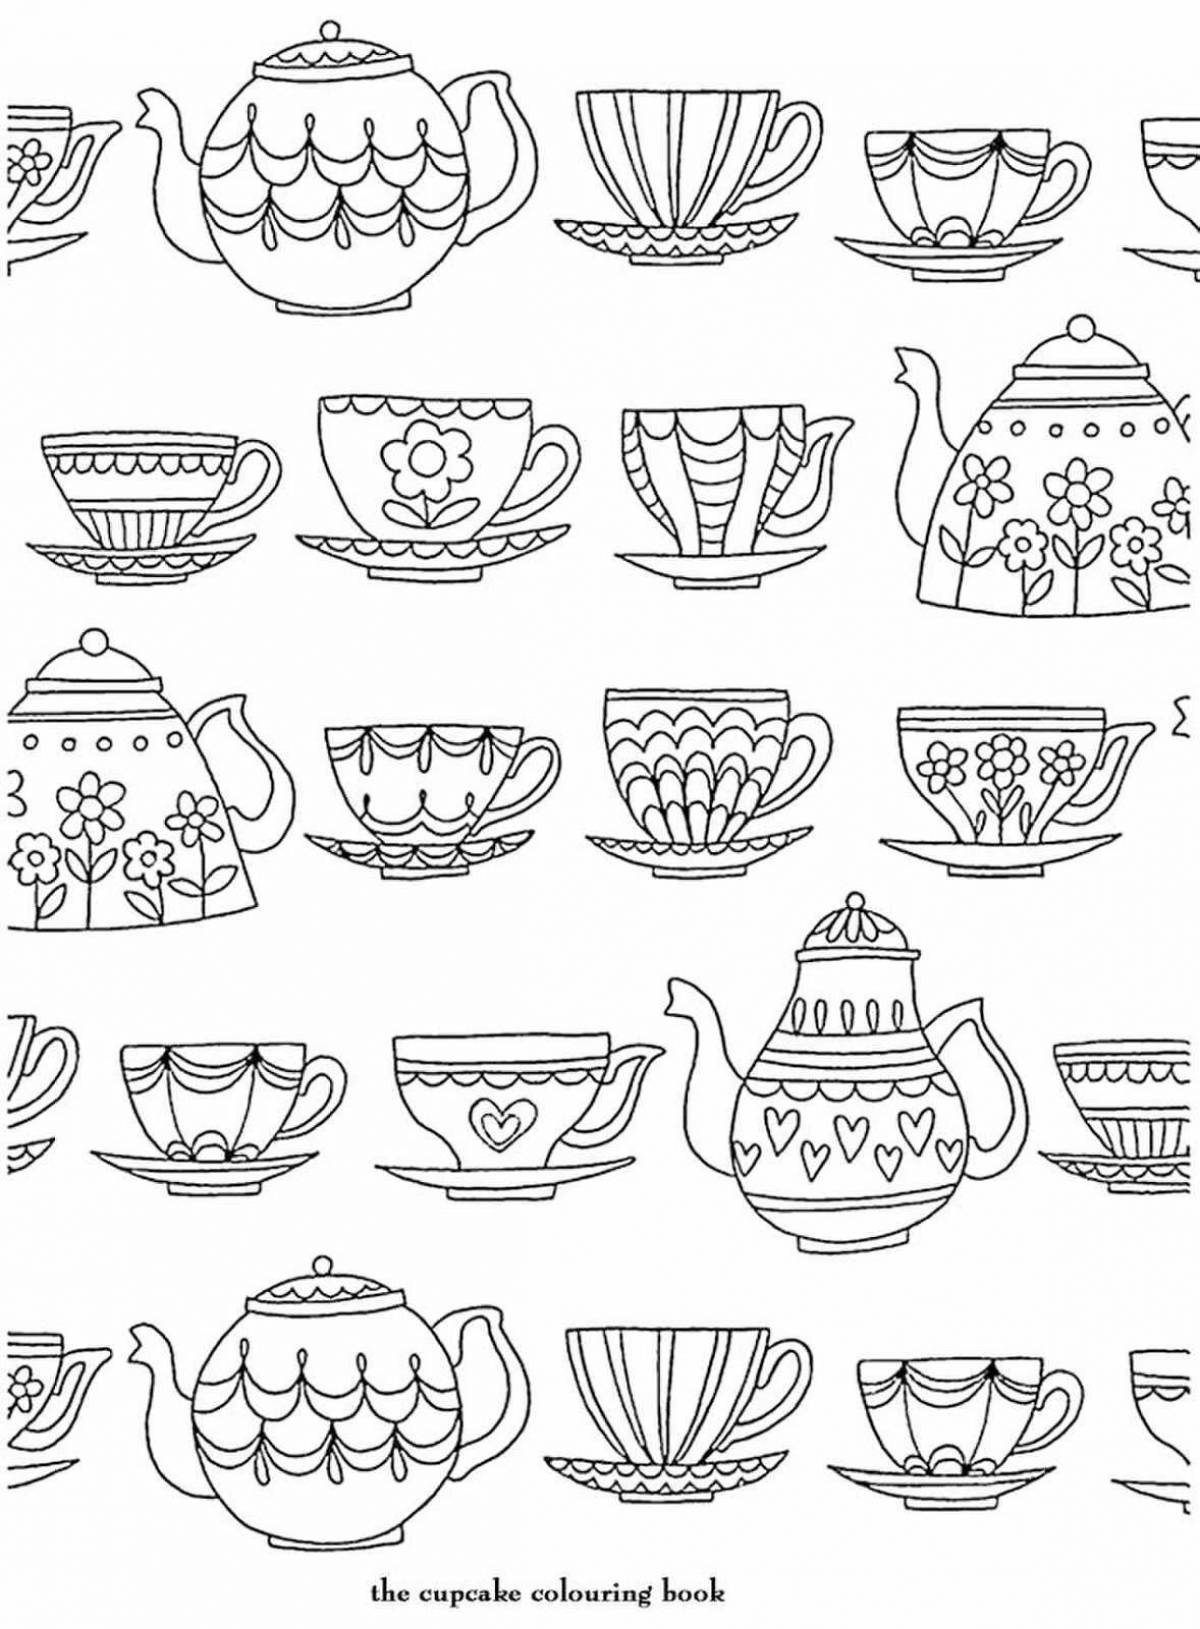 Coloring book playful bowl with Kazakh ornament